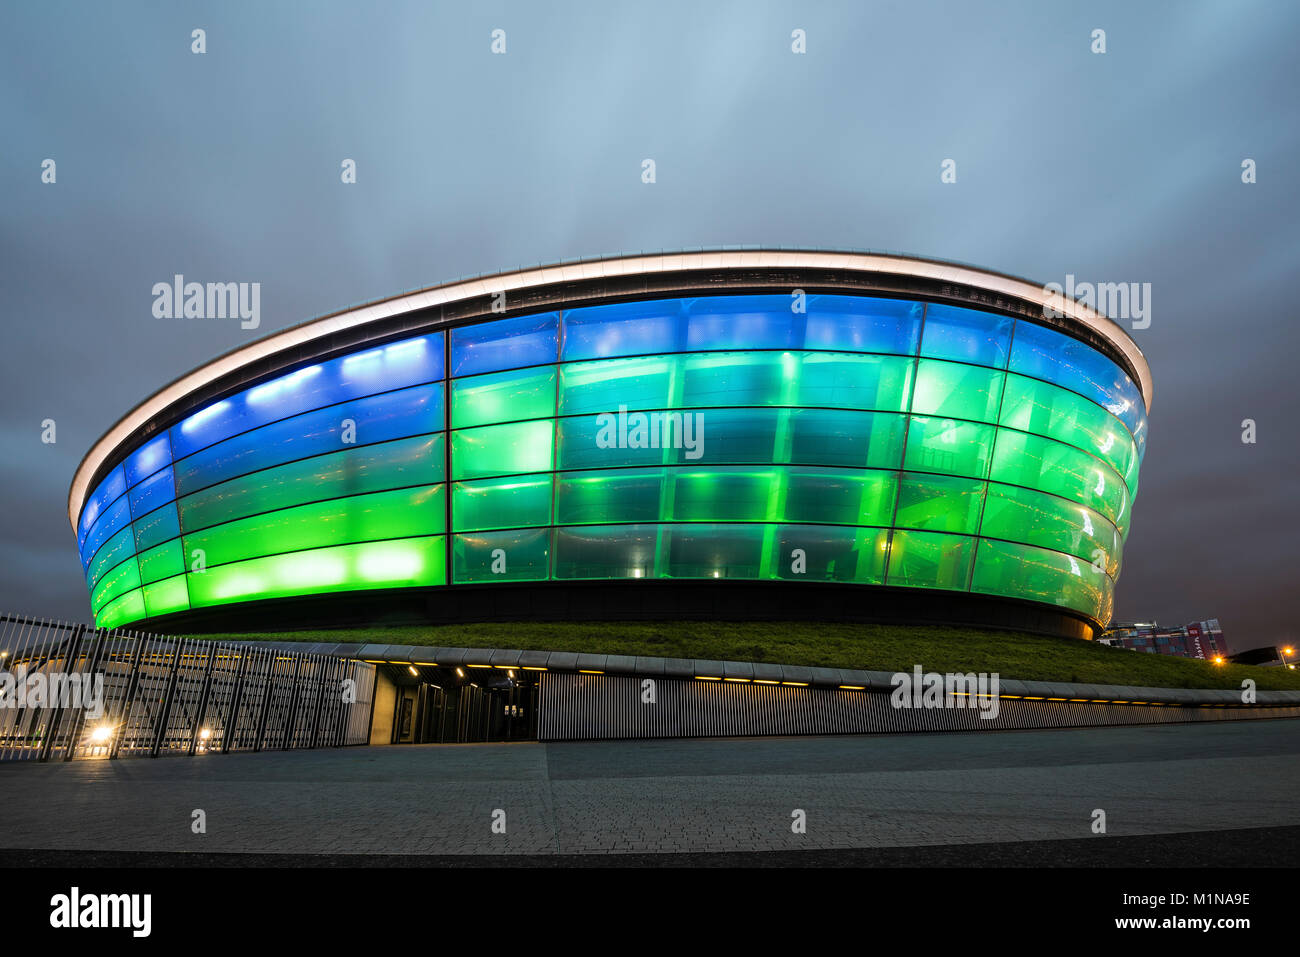 Night picture of the SSE Hydro AT THE Scottis Event Campus Glasgow. Stock Photo